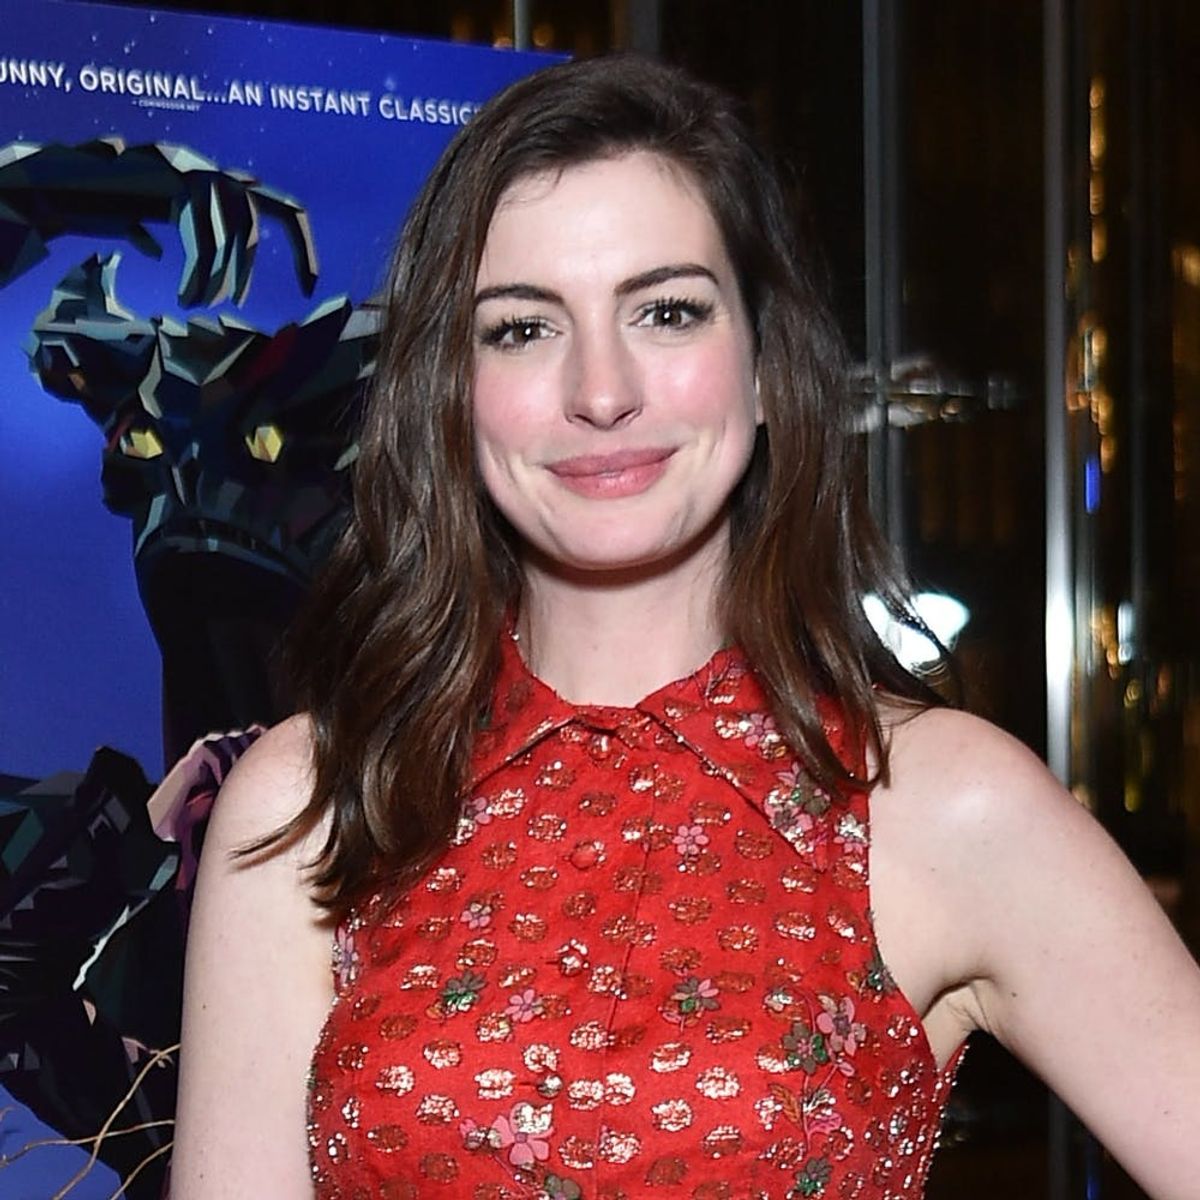 Anne Hathaway Shares Why She Regrets Sharing a Pic of Her Son Online